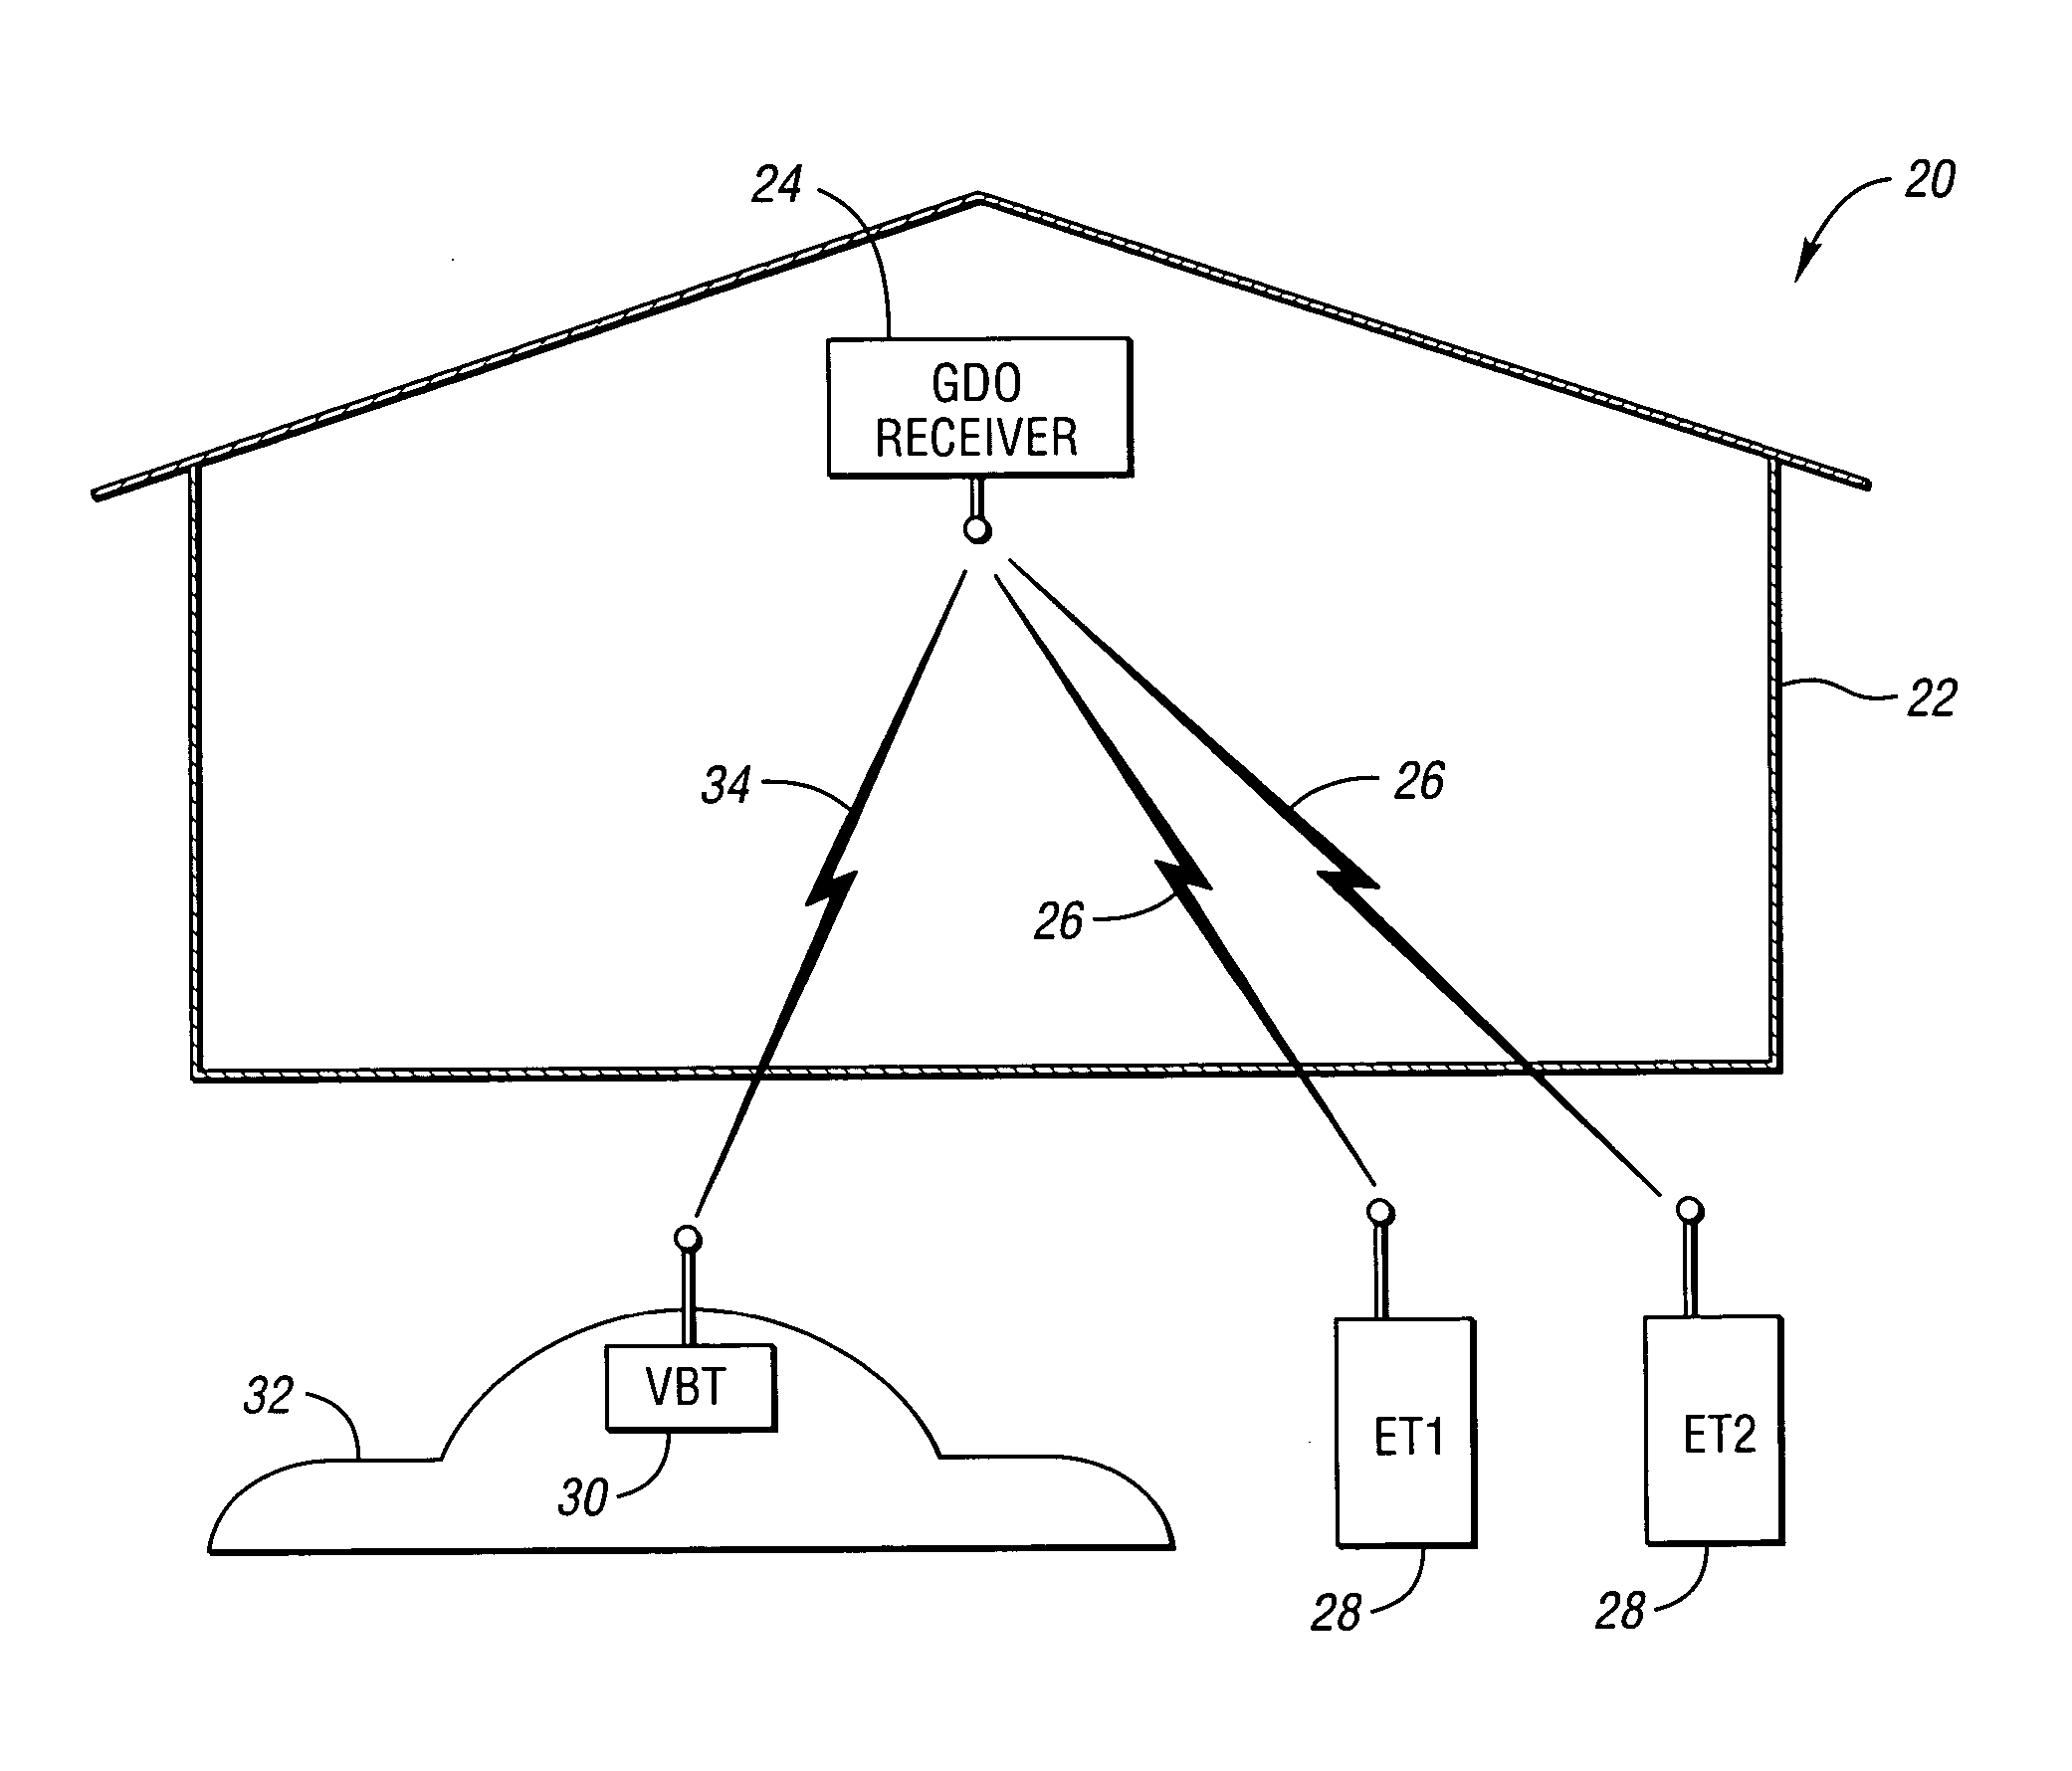 User-assisted programmable appliance control